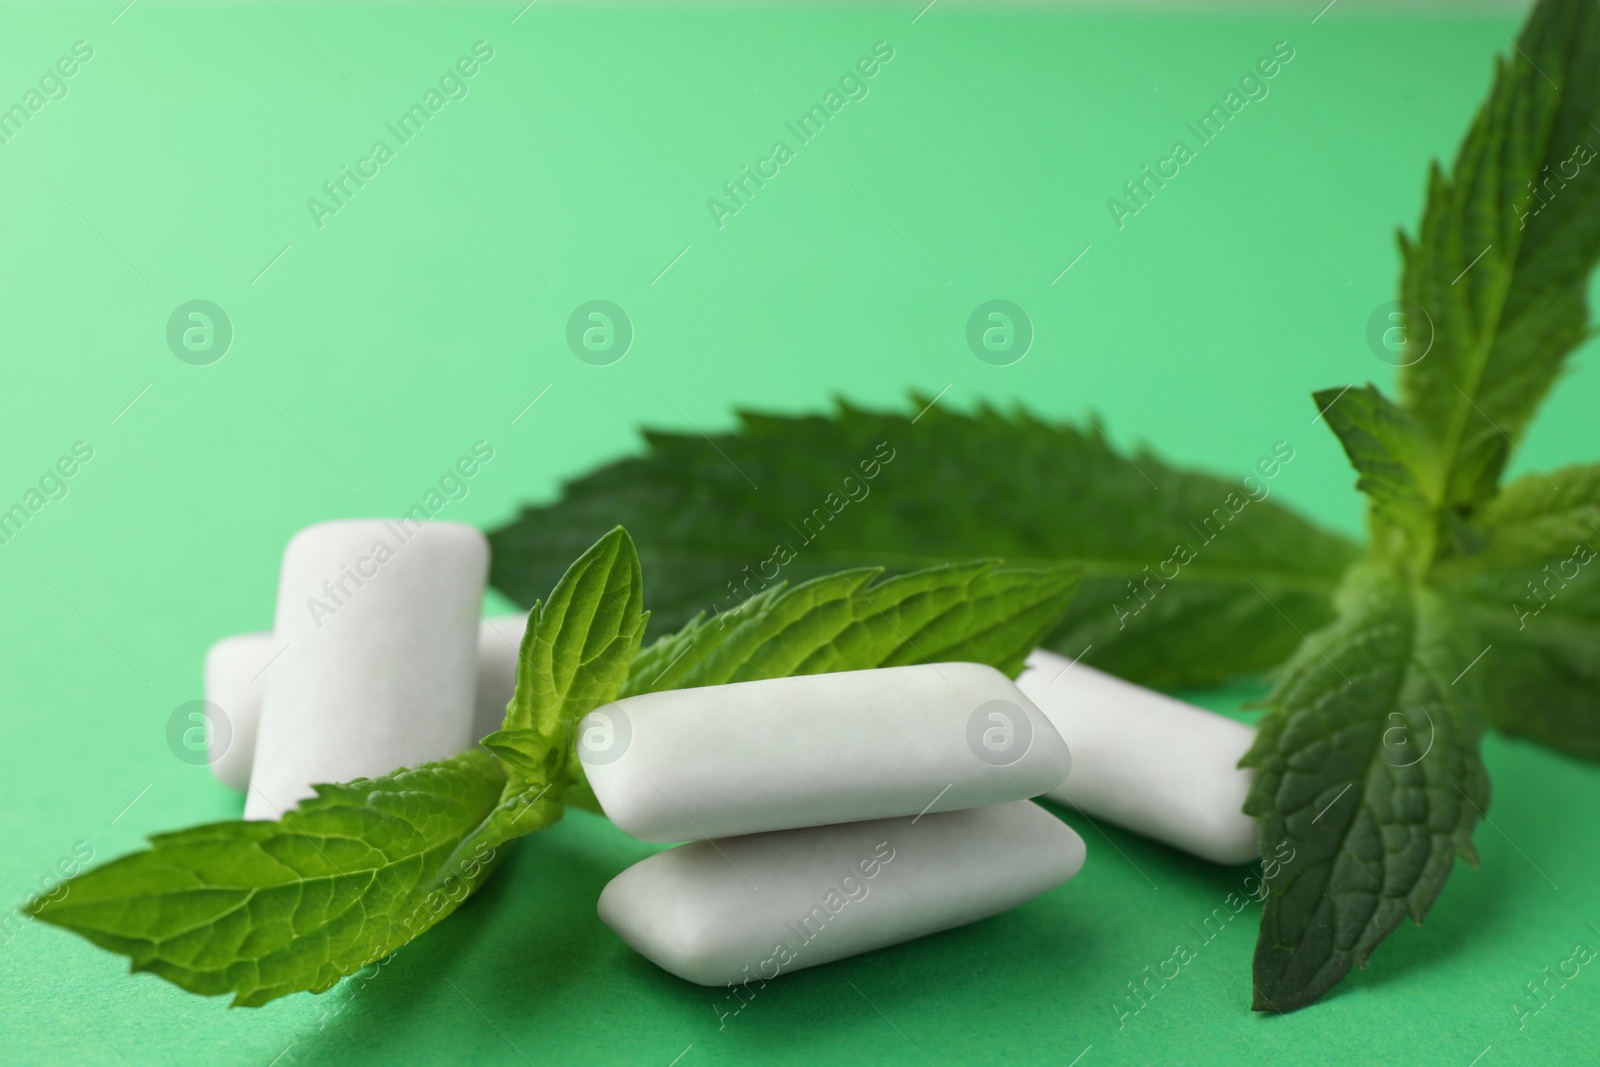 Photo of Tasty white chewing gums and mint leaves on green background, closeup